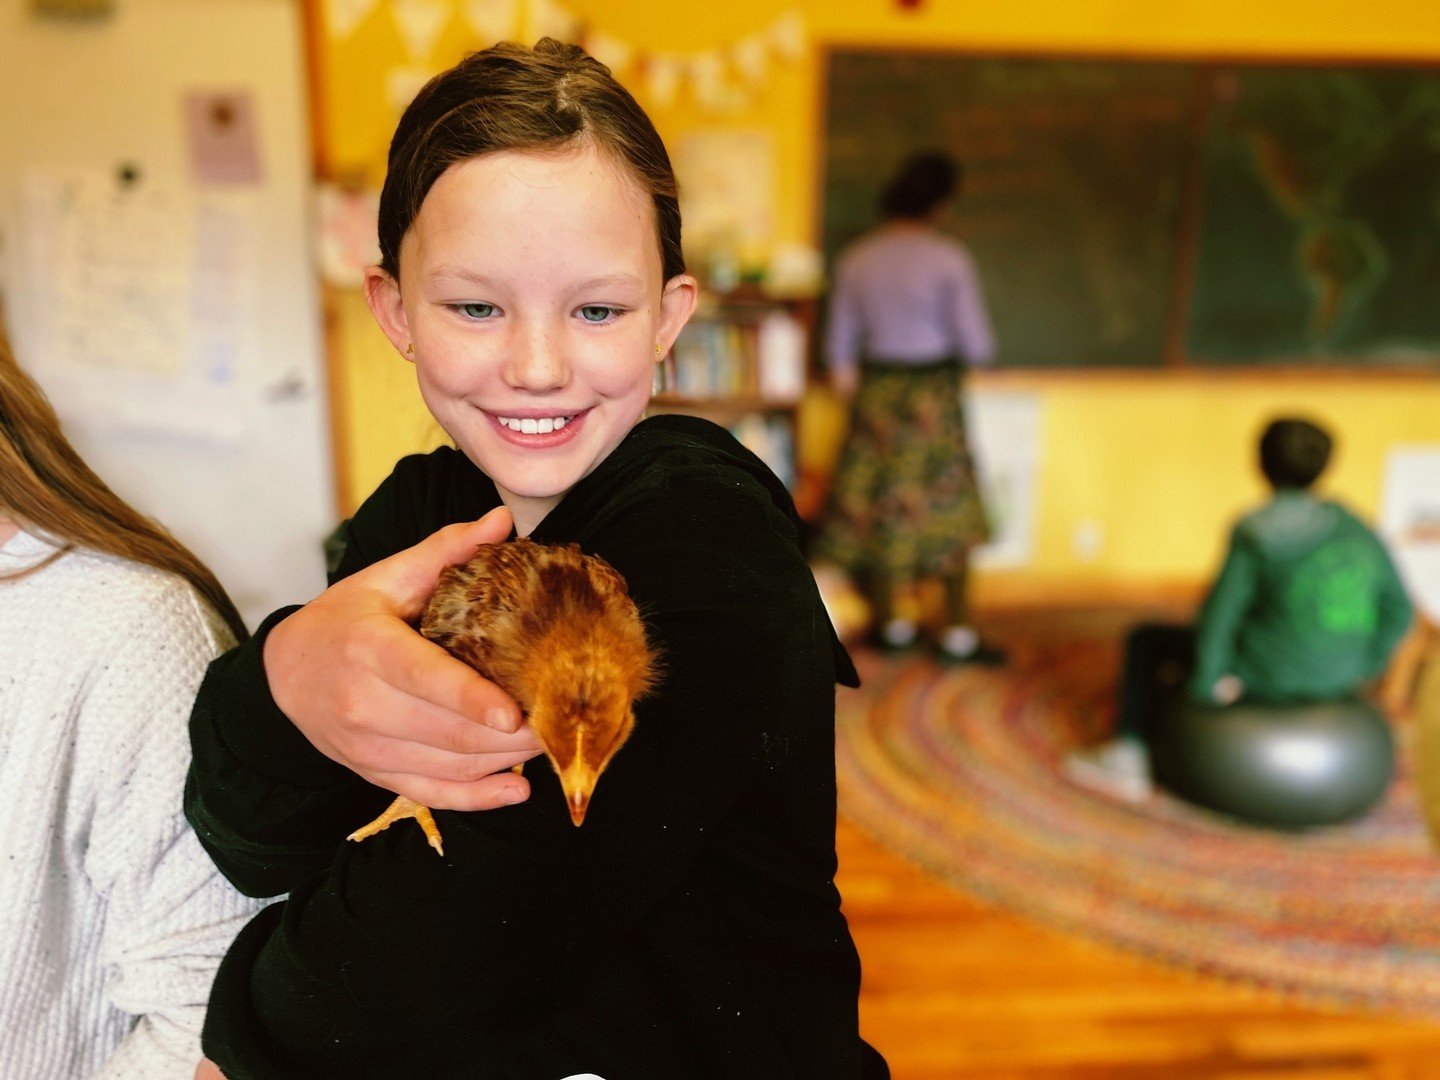 The chicks are getting a little big for their brooder! We're looking forward to warmer weather ahead so these cuties can join our cows on campus pasture.⁠
⁠
#farmandlandstewardship #farmingwithkids #reallifescience⁠
#thefarm #thefarmatithacawaldorf #